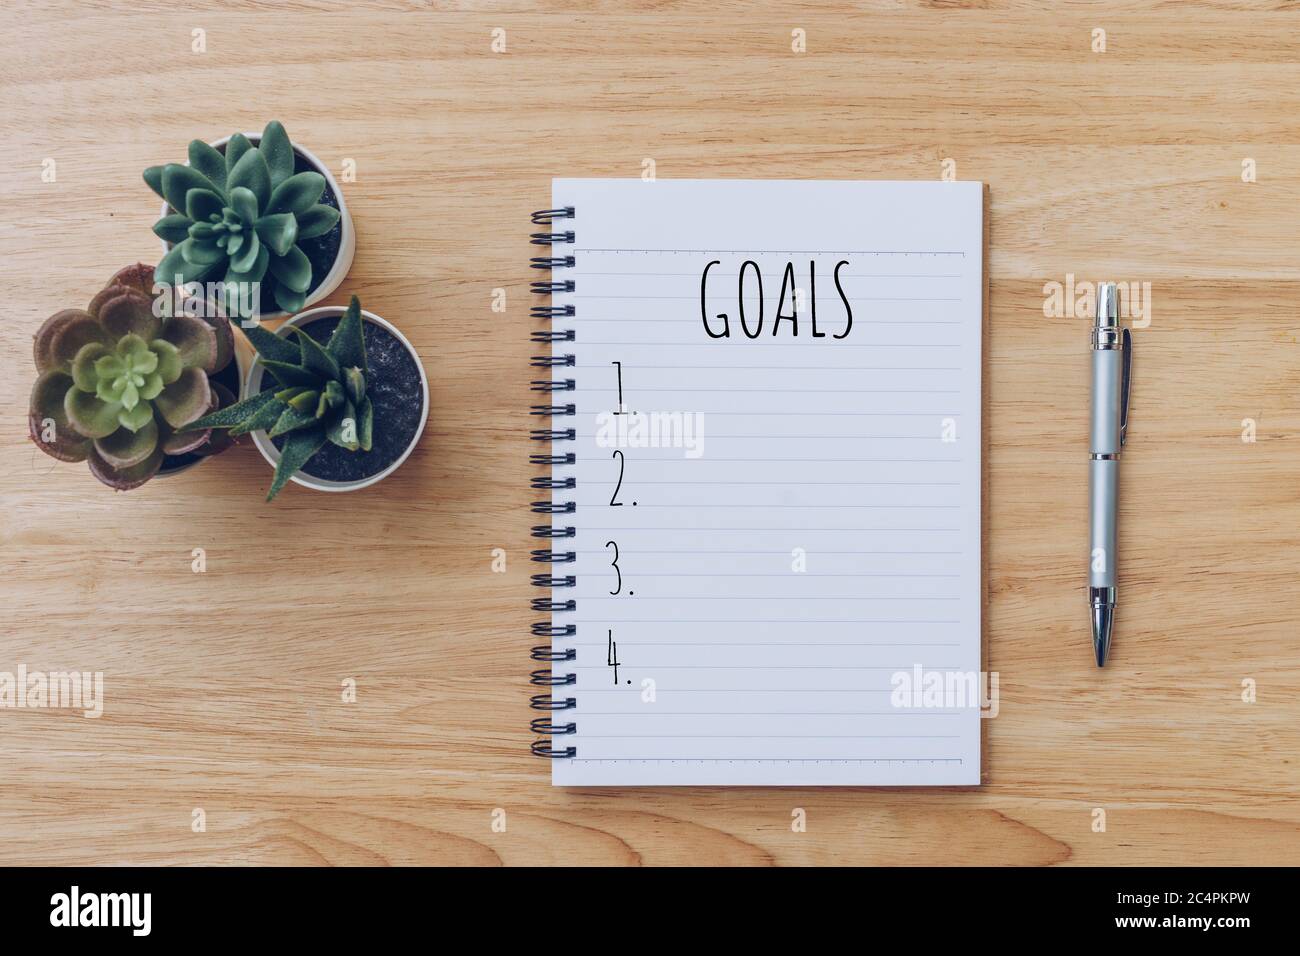 New year  GOALS list. Office desk table with notebooks and pancil with pot plant. Stock Photo